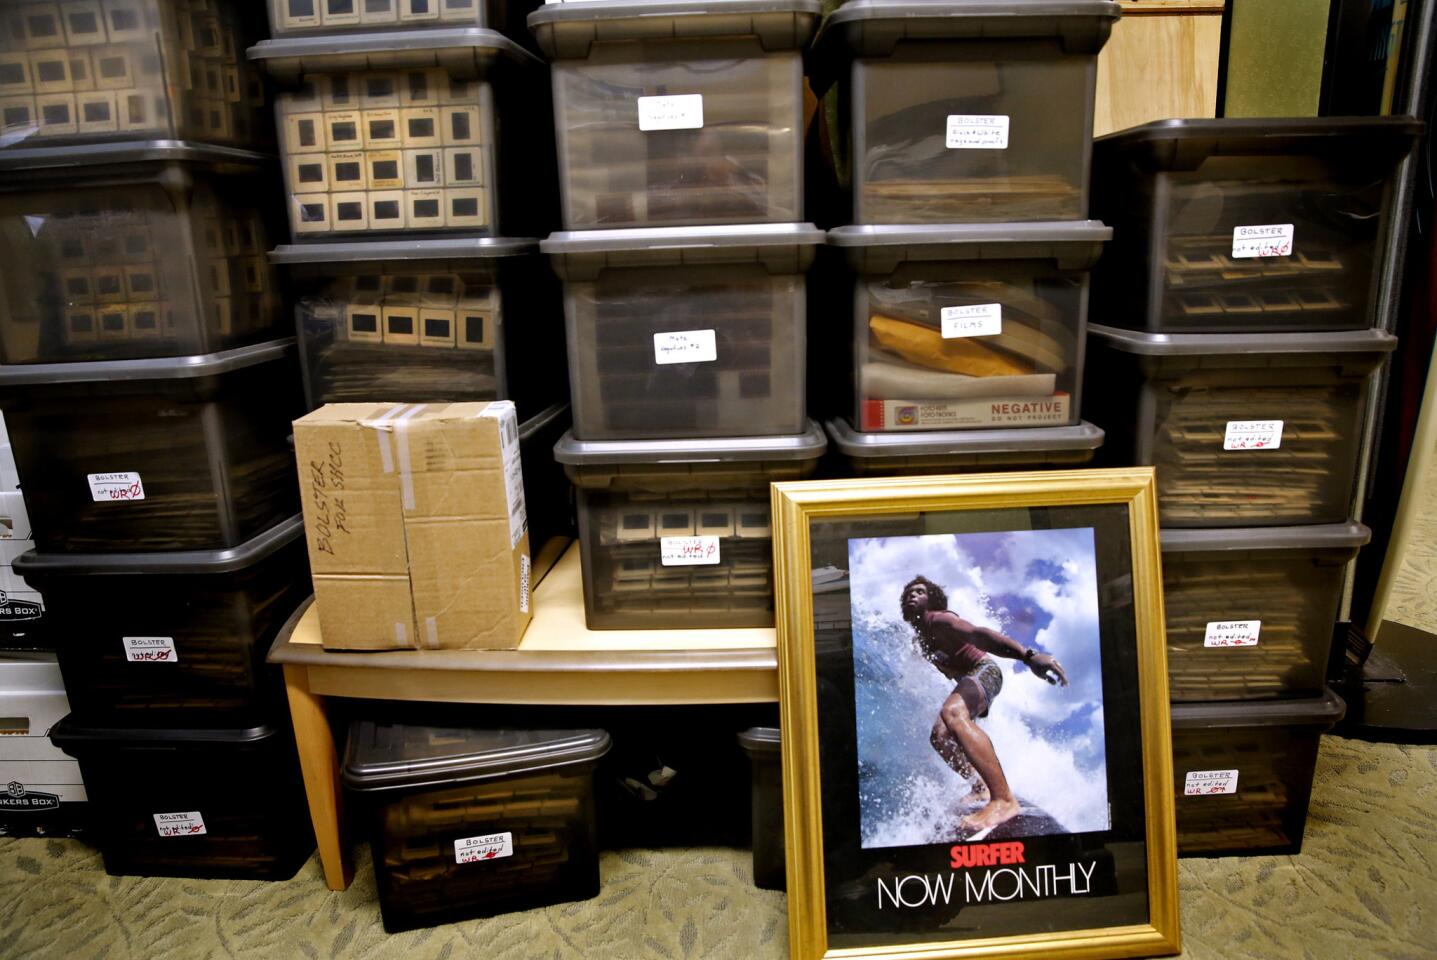 Thousands of slides from numerous photographers await digital scanning by archivist Steve Wilkings at the Surfing Heritage and Culture Center in San Clemente. Wilkings, a noted surf photographer in the 1960s and '70s, pioneered bolting a camera to the front of notable surfers' boards and triggering it from the beach by radio control.